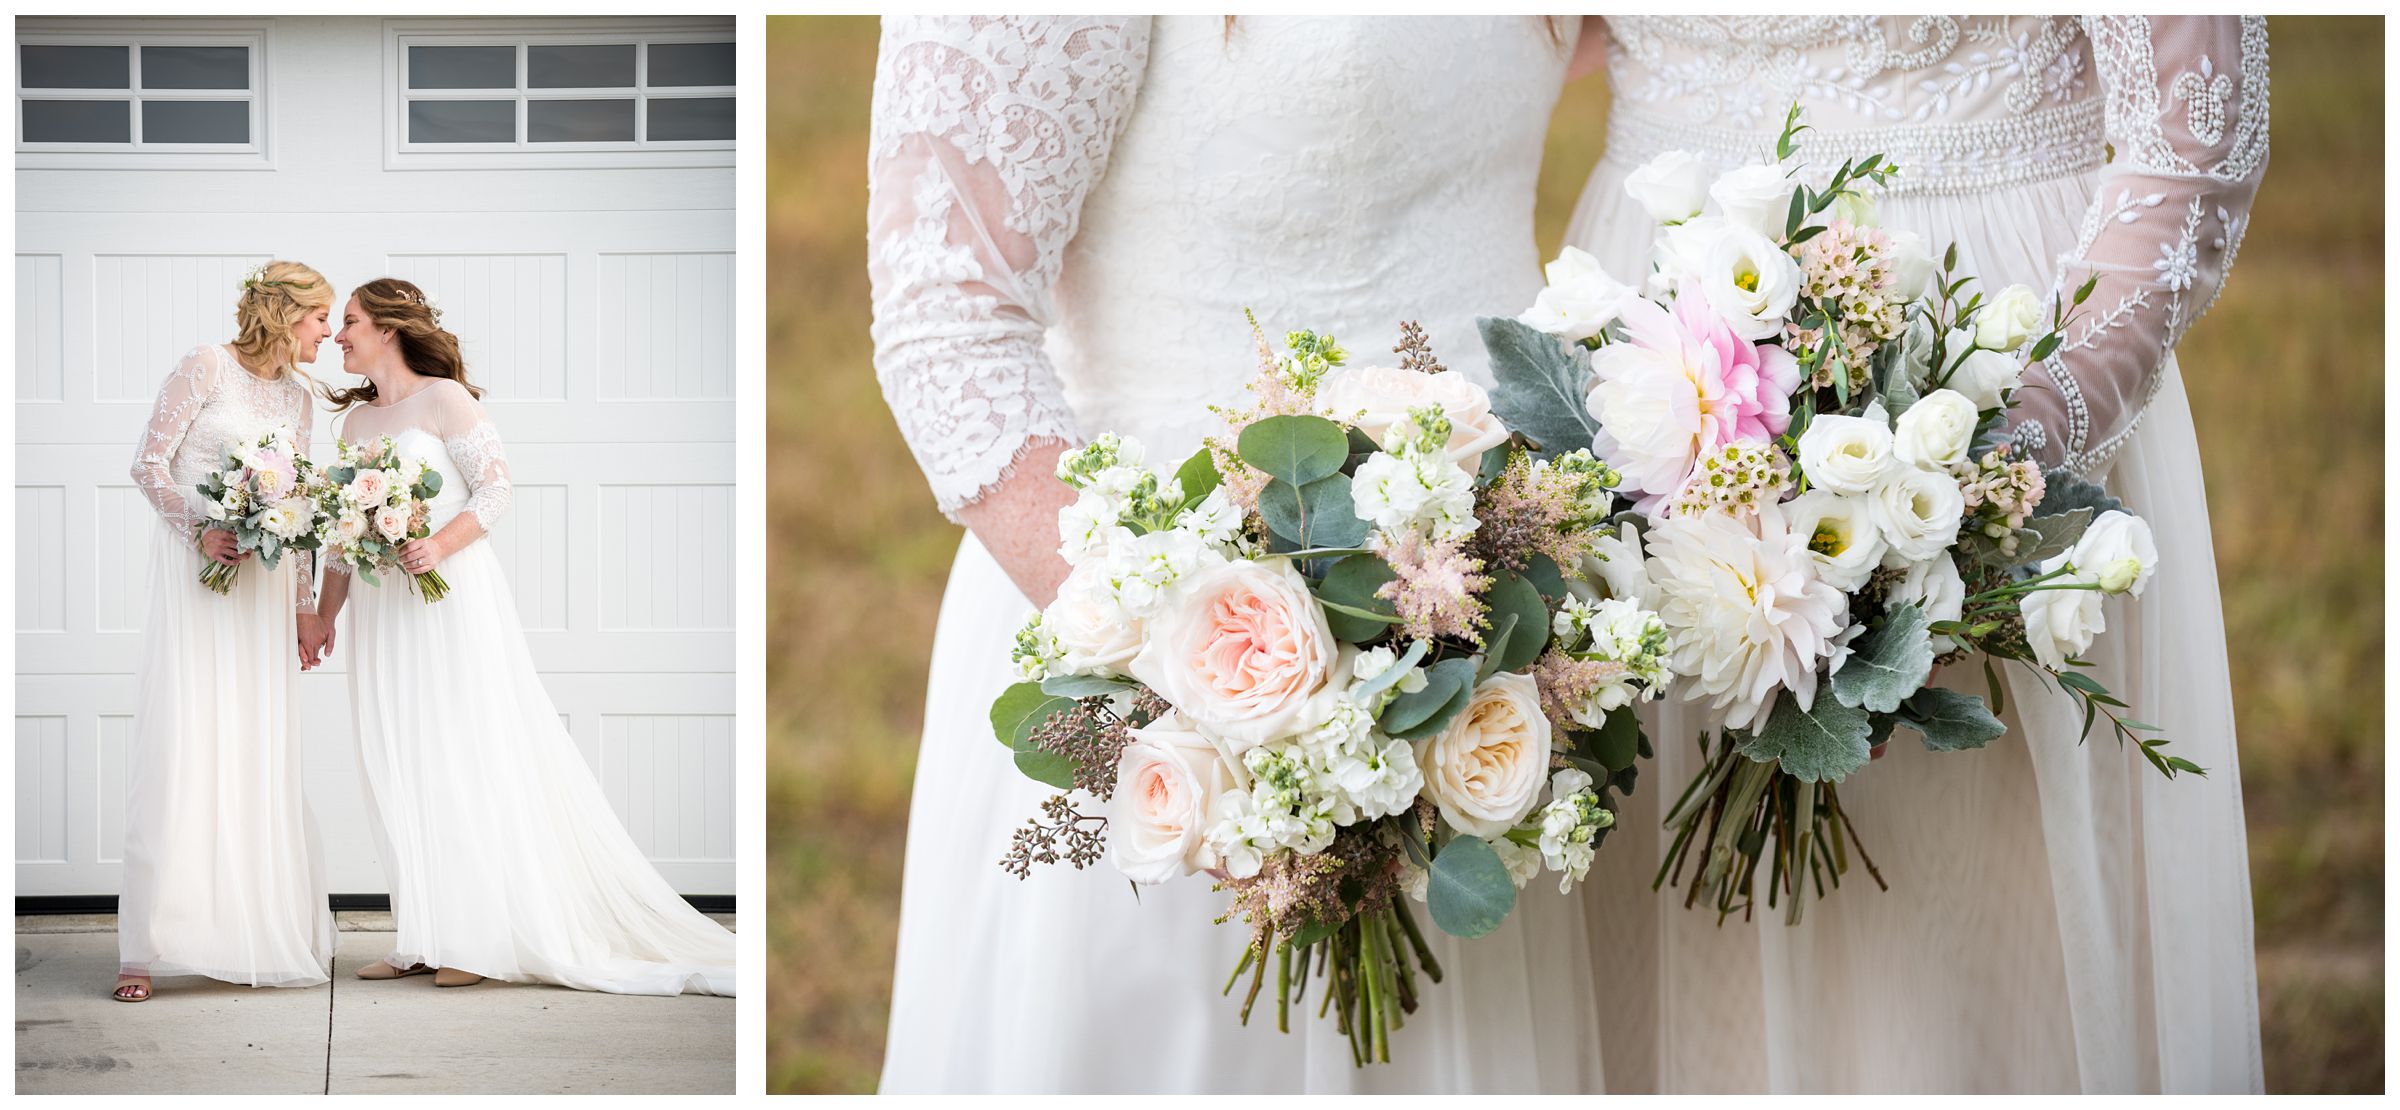 Two brides holding white and blush pink bouquets on wedding day.